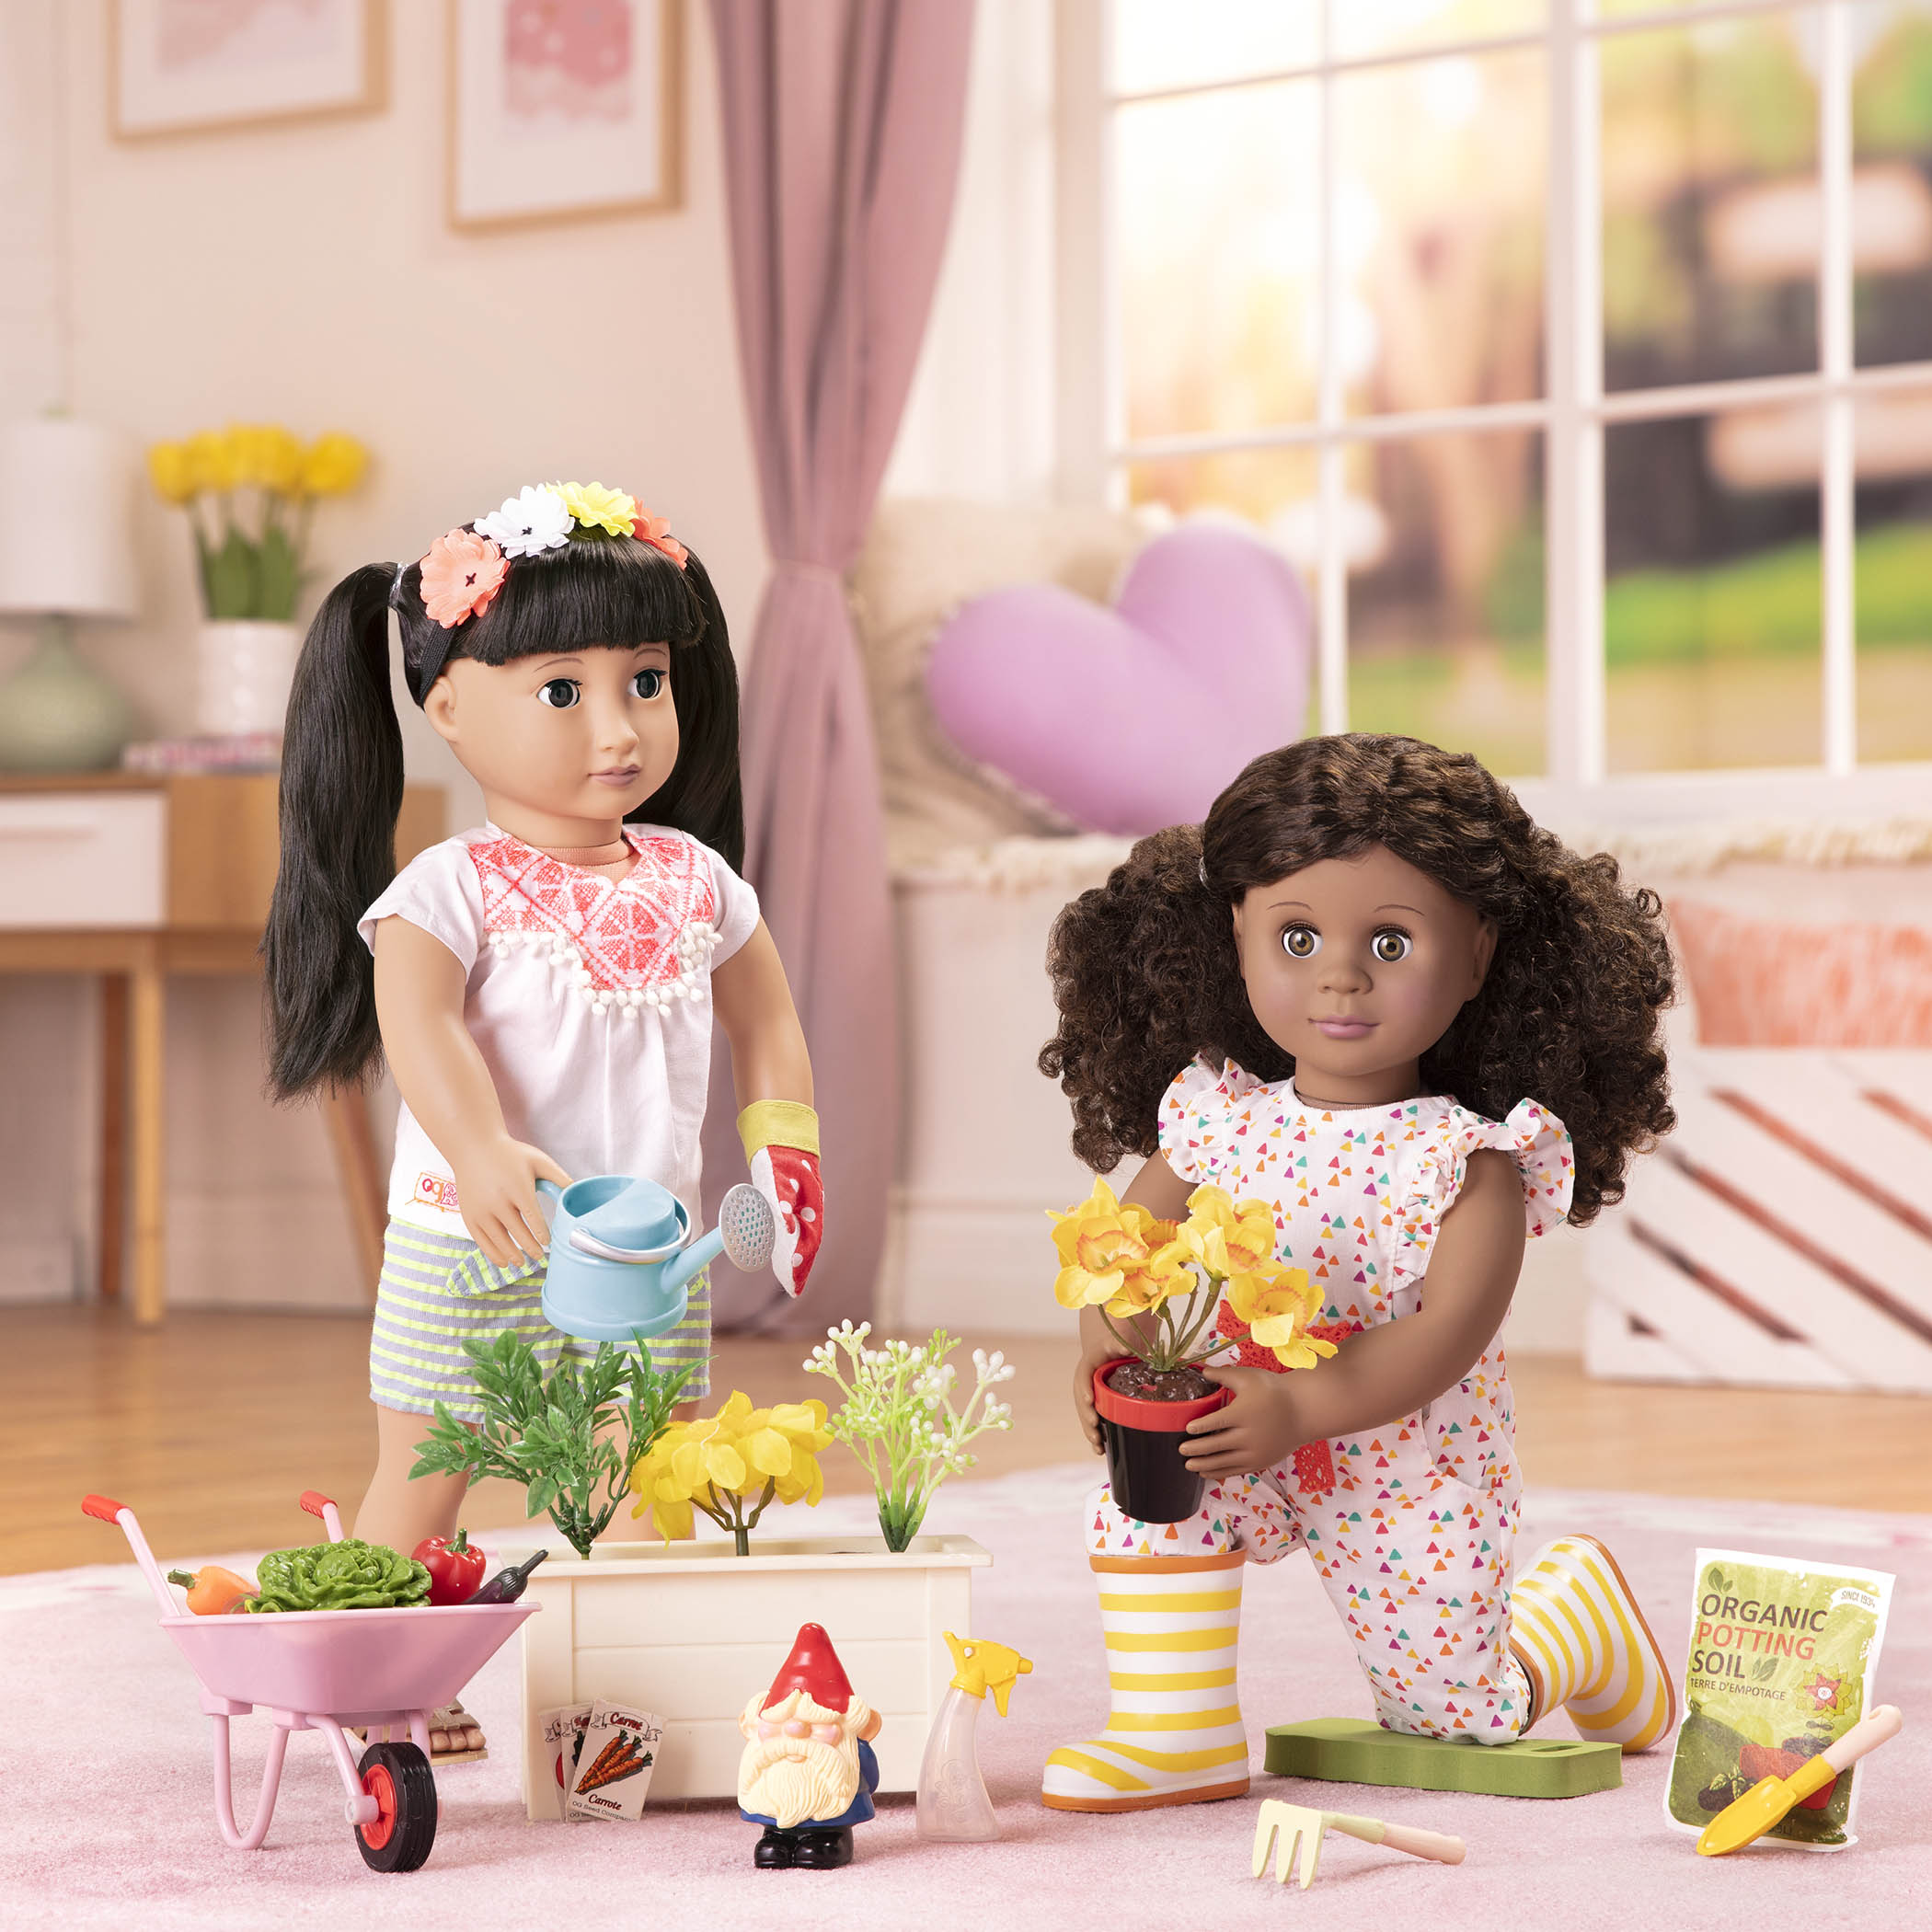 18-inch doll with gardening playset